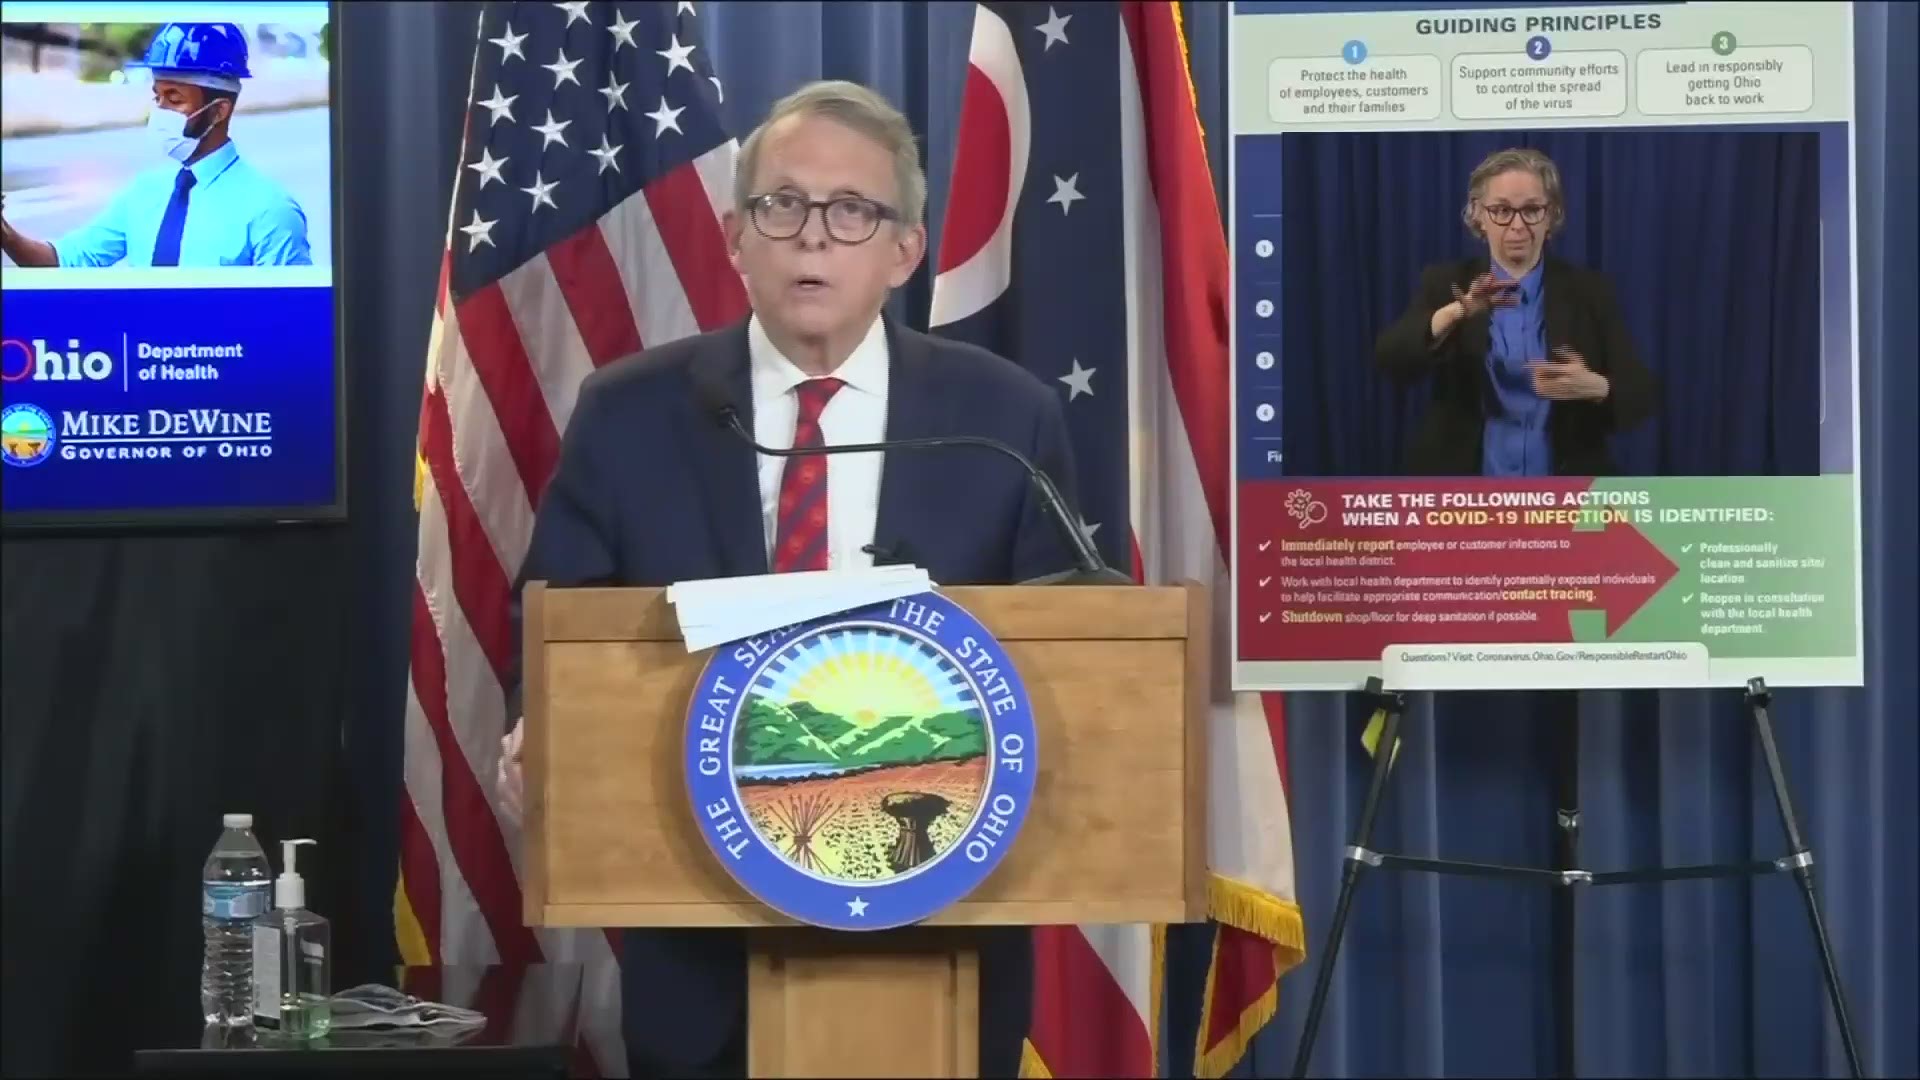 The reopening of Ohio has started.  Ohio Governor Mike DeWine detailed the state's plans to begin the process of reopening its economy later this week.